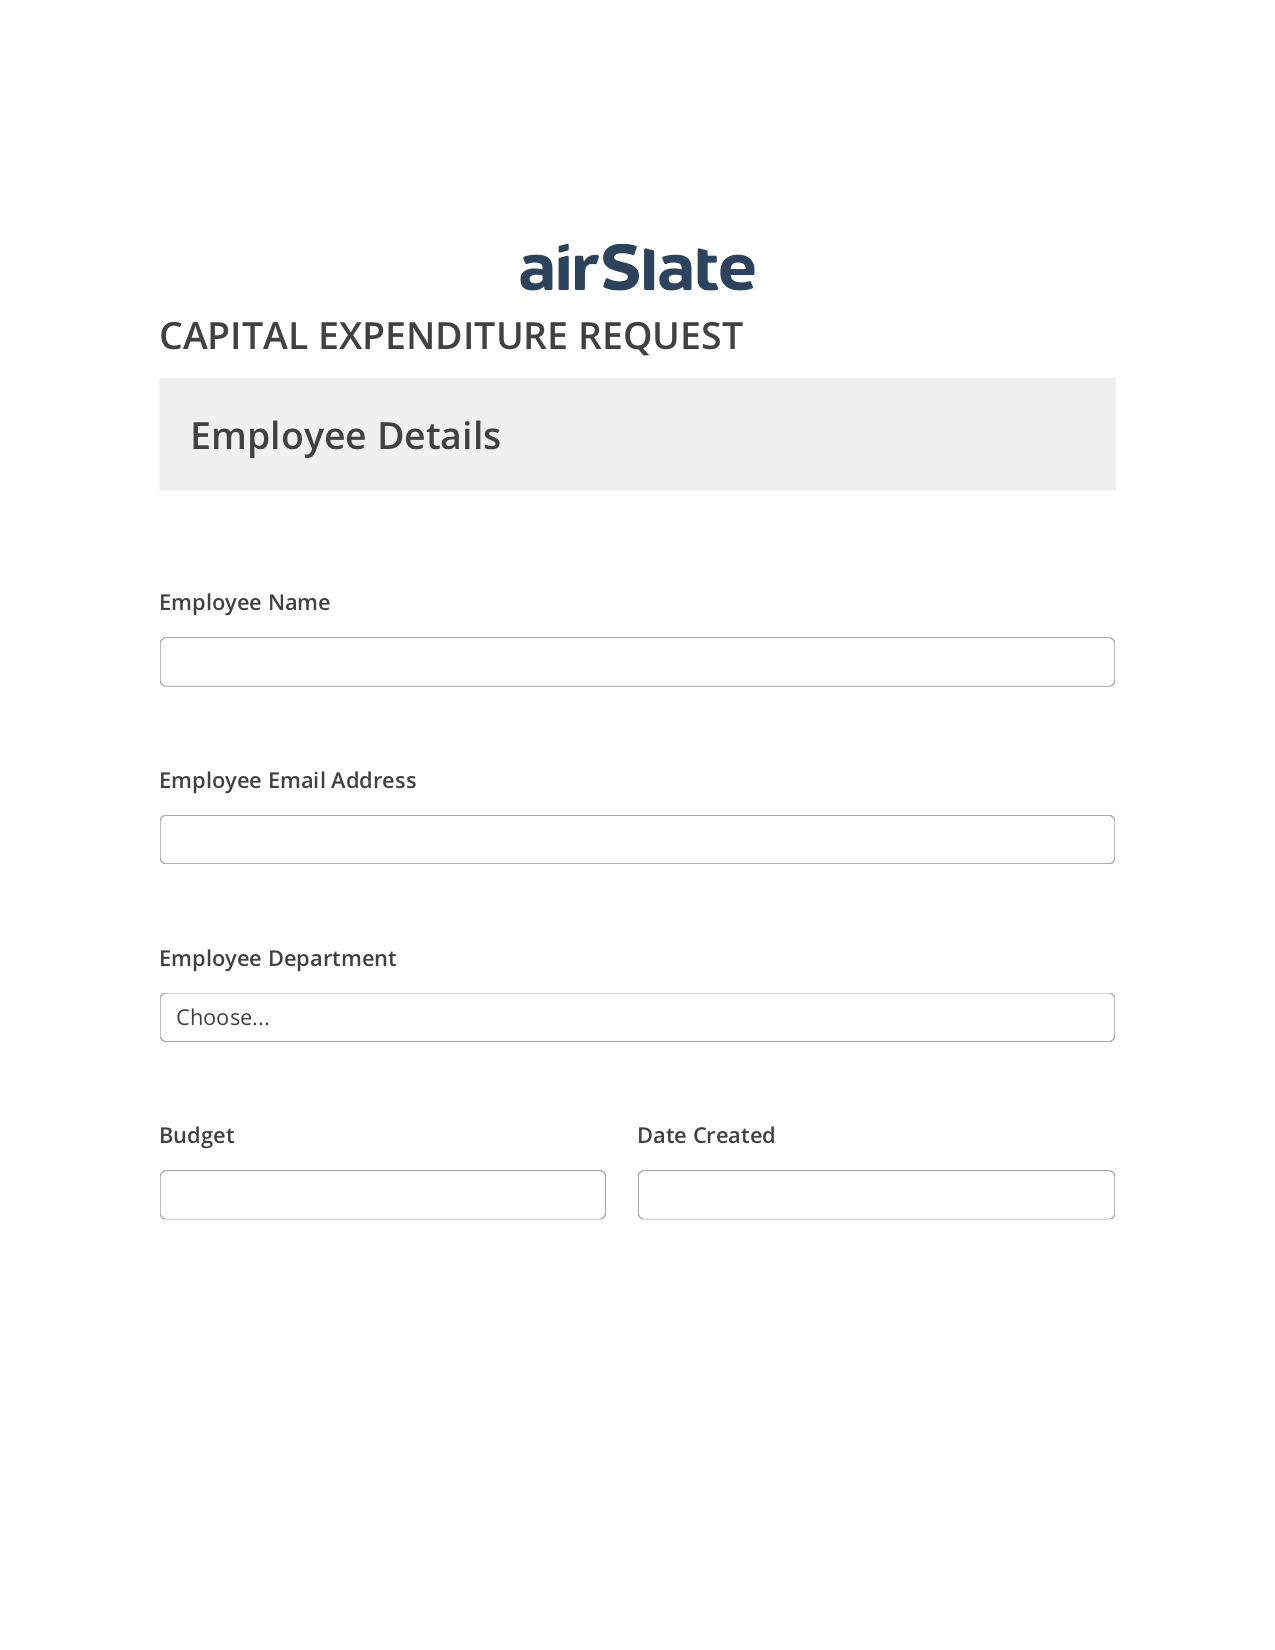 Multirole Capital Expenditure Request Approval Workflow Pre-fill Slate from MS Dynamics 365 record, Email Notification Bot, Slack Two-Way Binding